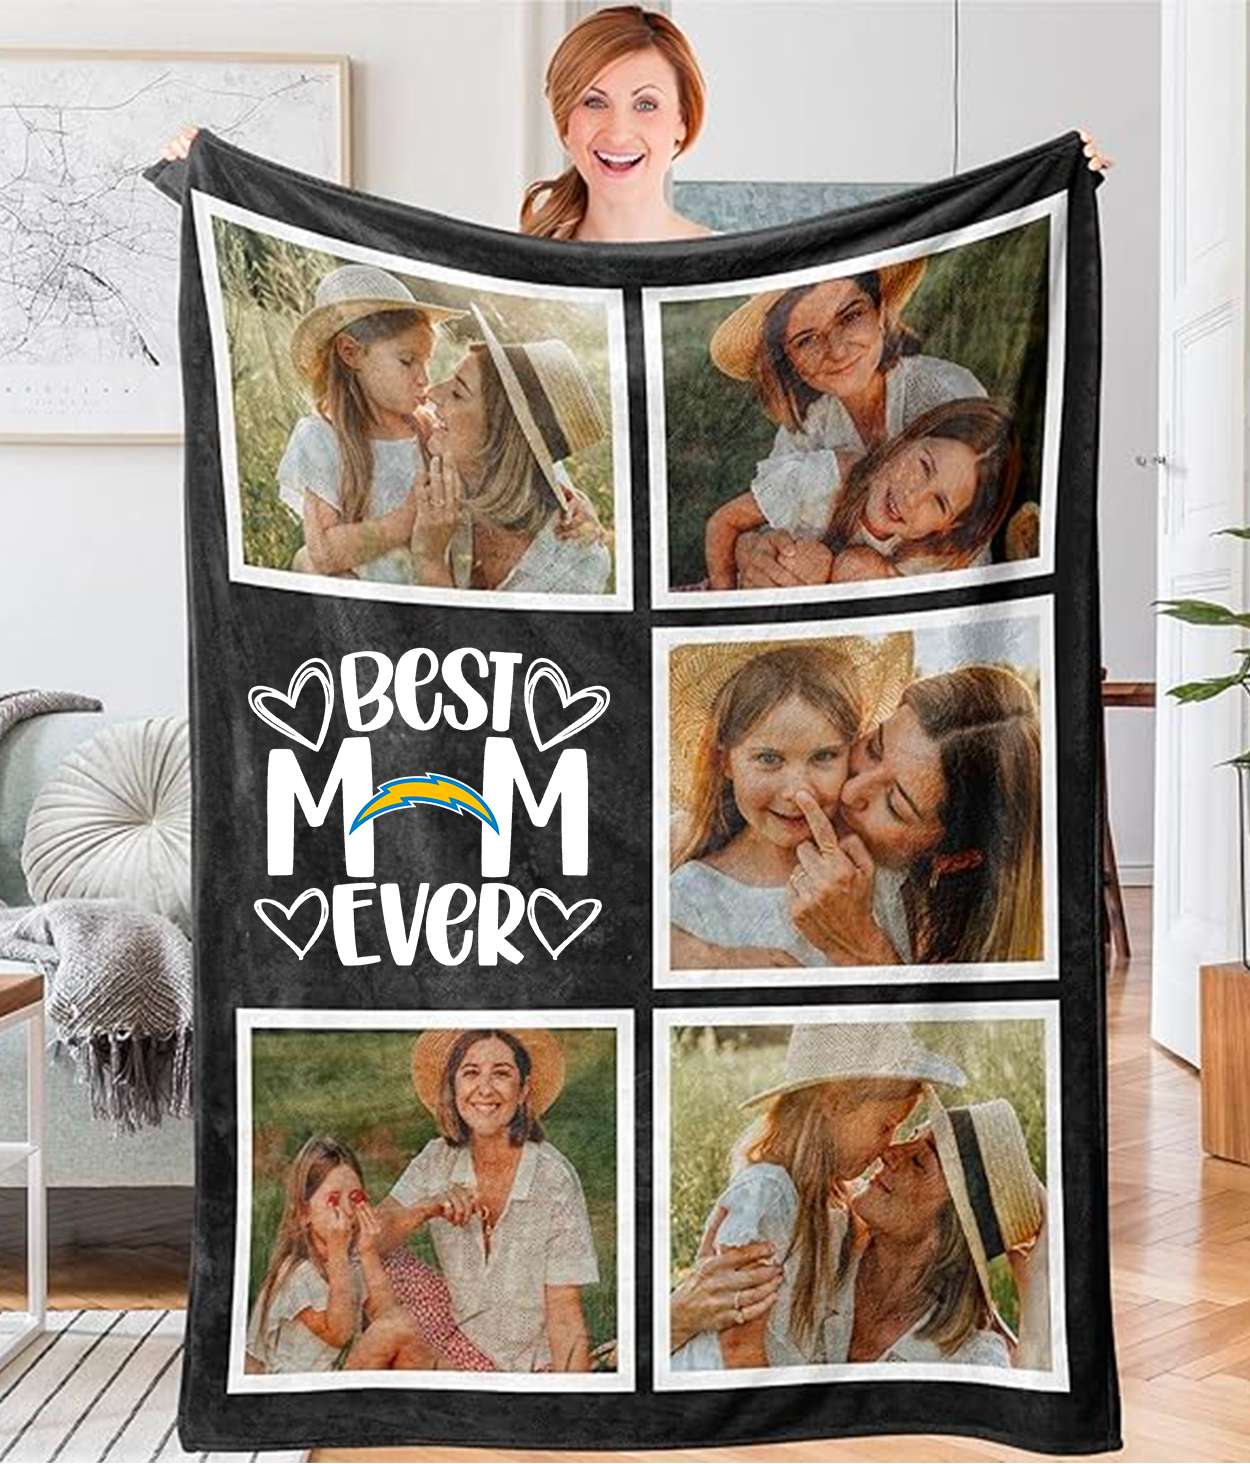 Best Mom Ever - Custom NFL Los Angeles Chargers Blankets with Pictures for Mother's Day Gift